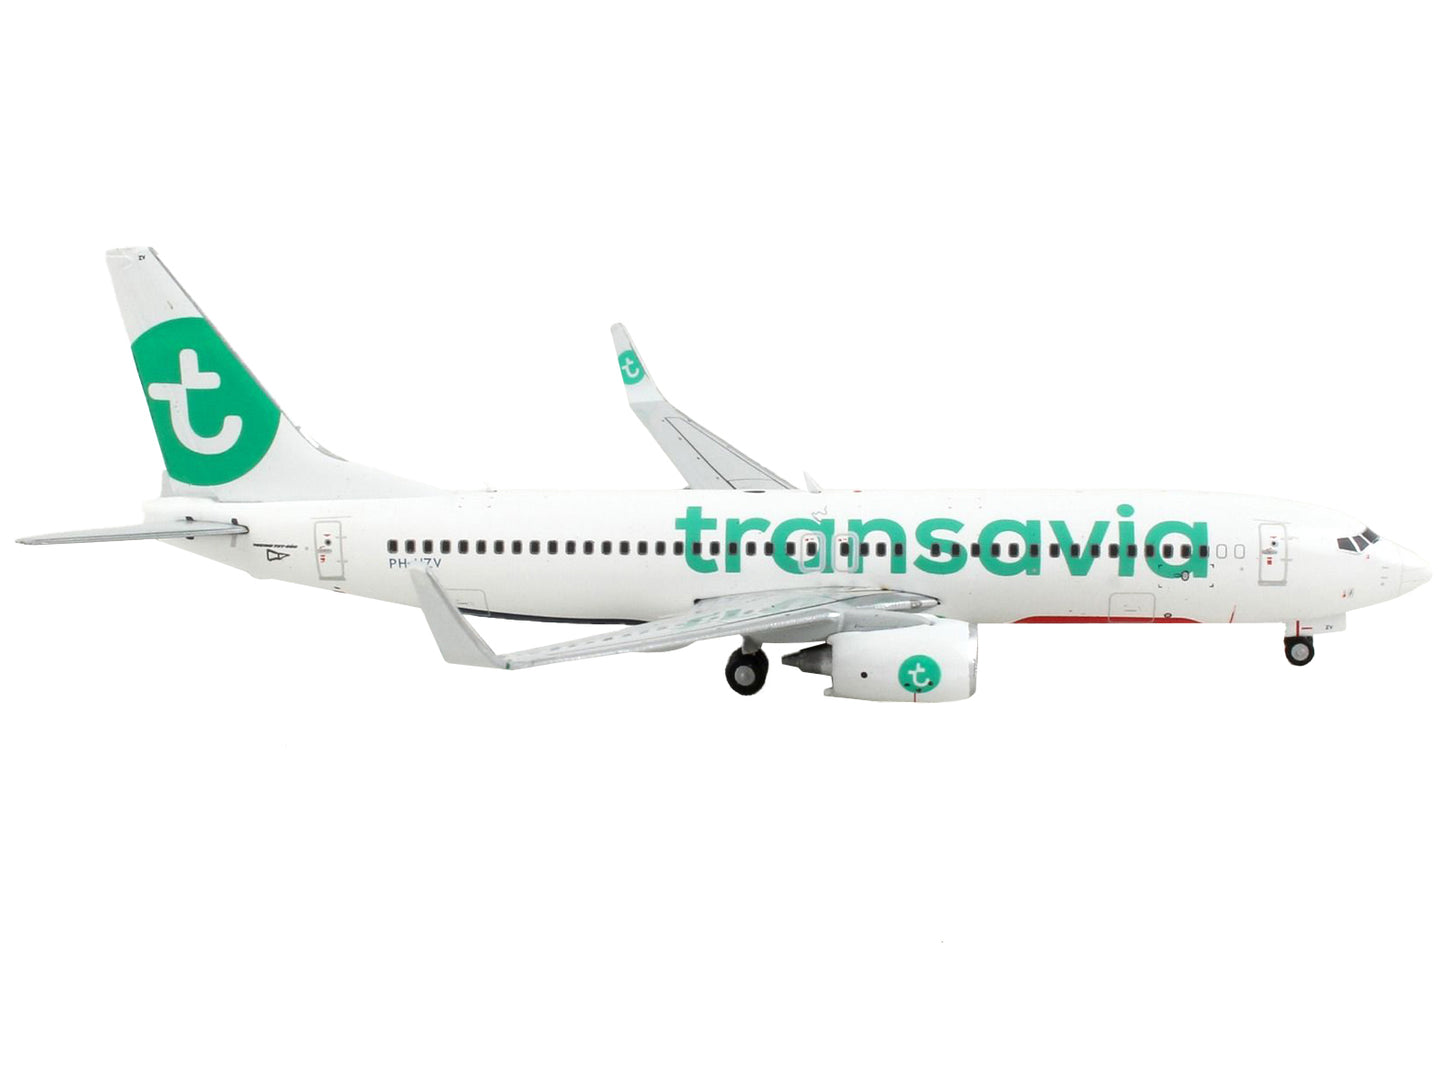 Boeing 737-800 Commercial Aircraft "Transavia Airlines" White with Green Tail 1/400 Diecast Model Airplane by GeminiJets